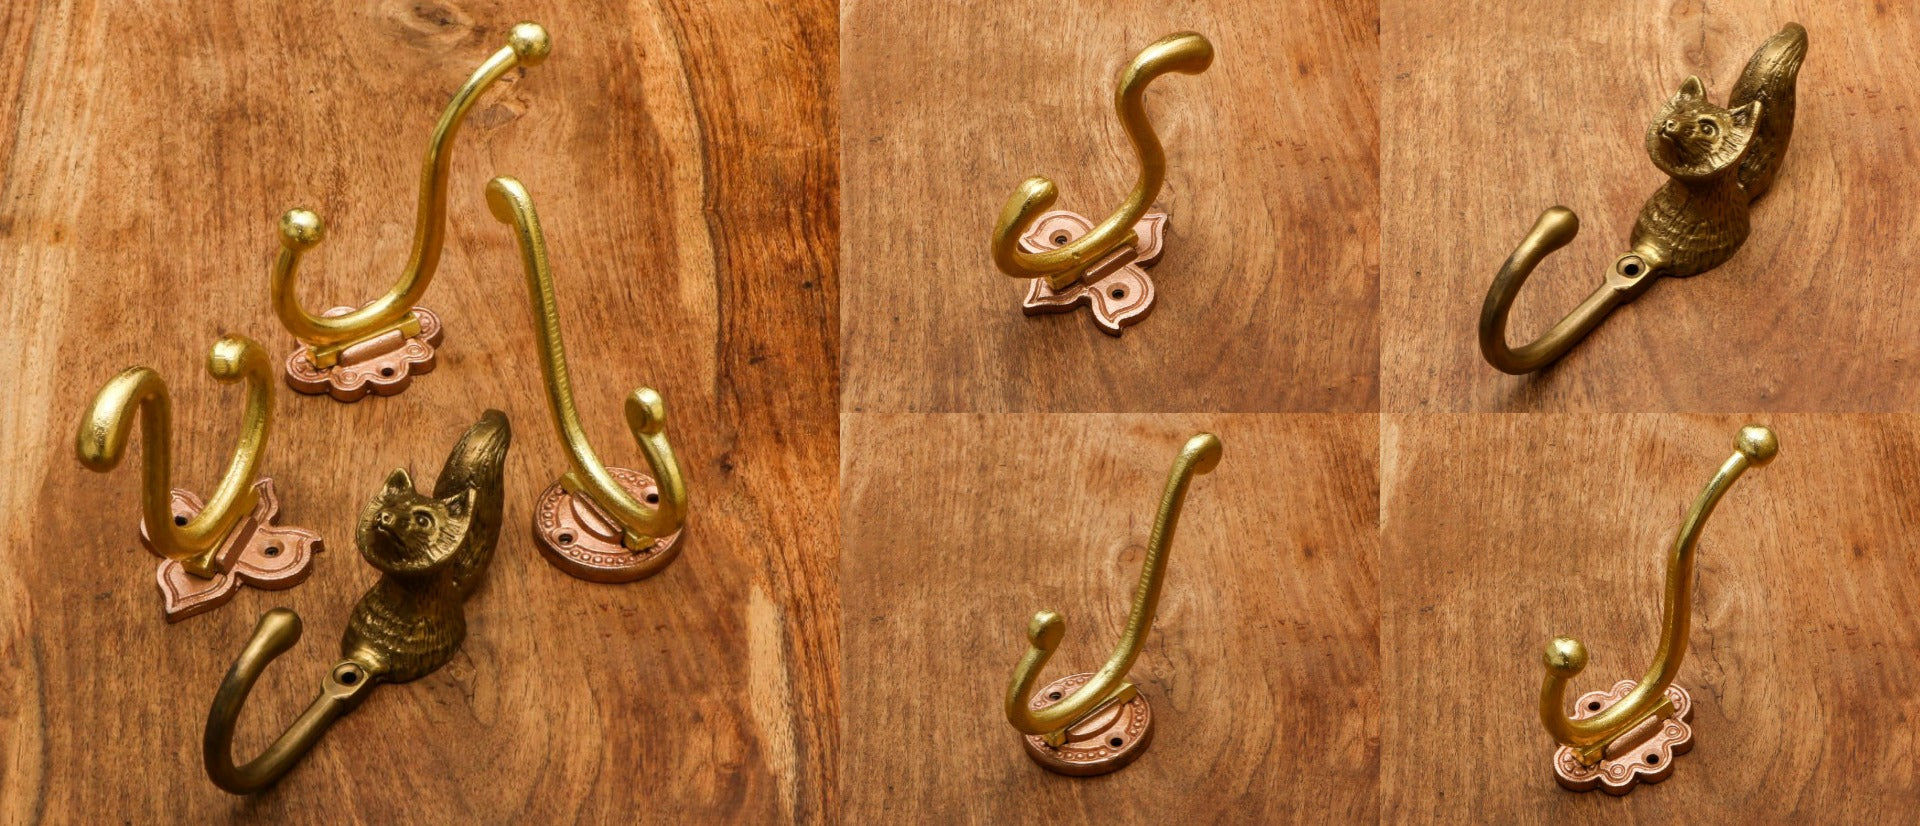 Get hooked on our fantastic new range of Copper and Brass hooks